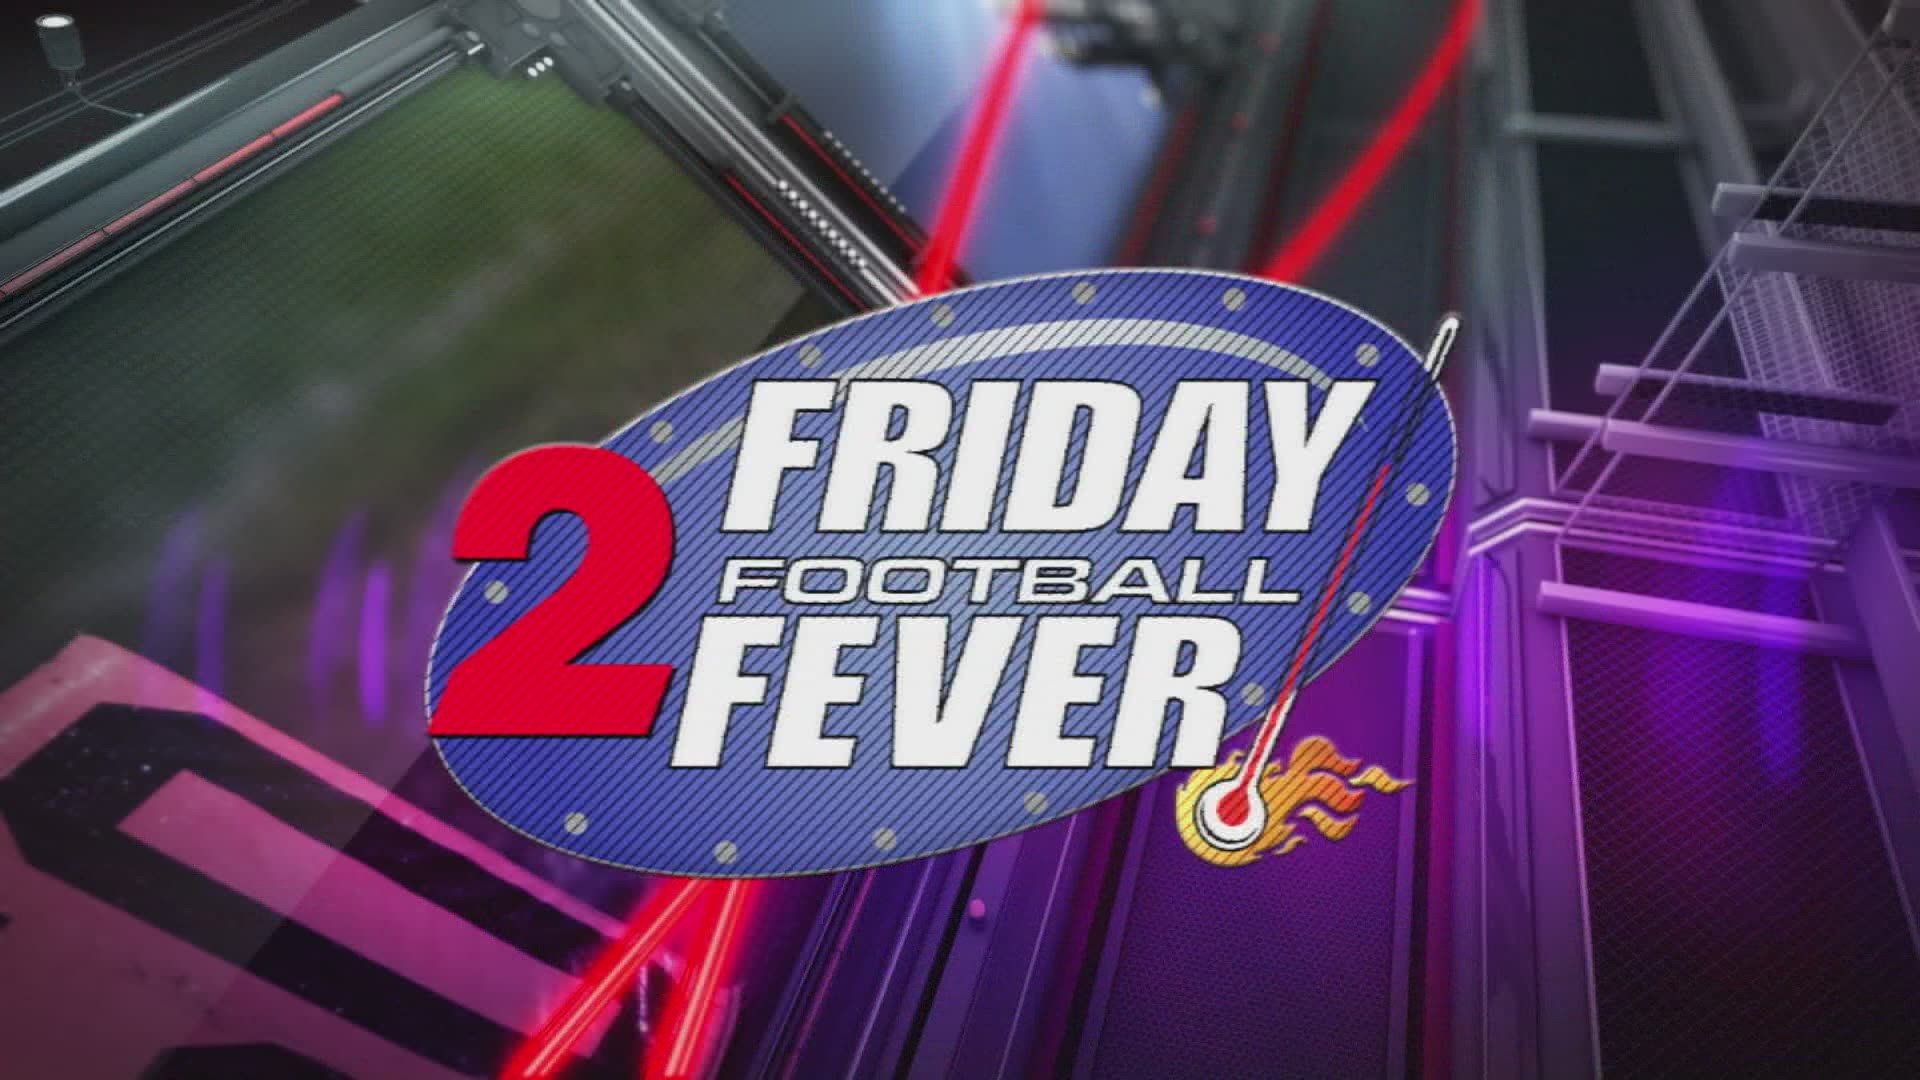 Wowwww! Check out these jaw-dropping top 5 plays from WFMY News 2's Friday Football Fever on August 30, 2019.